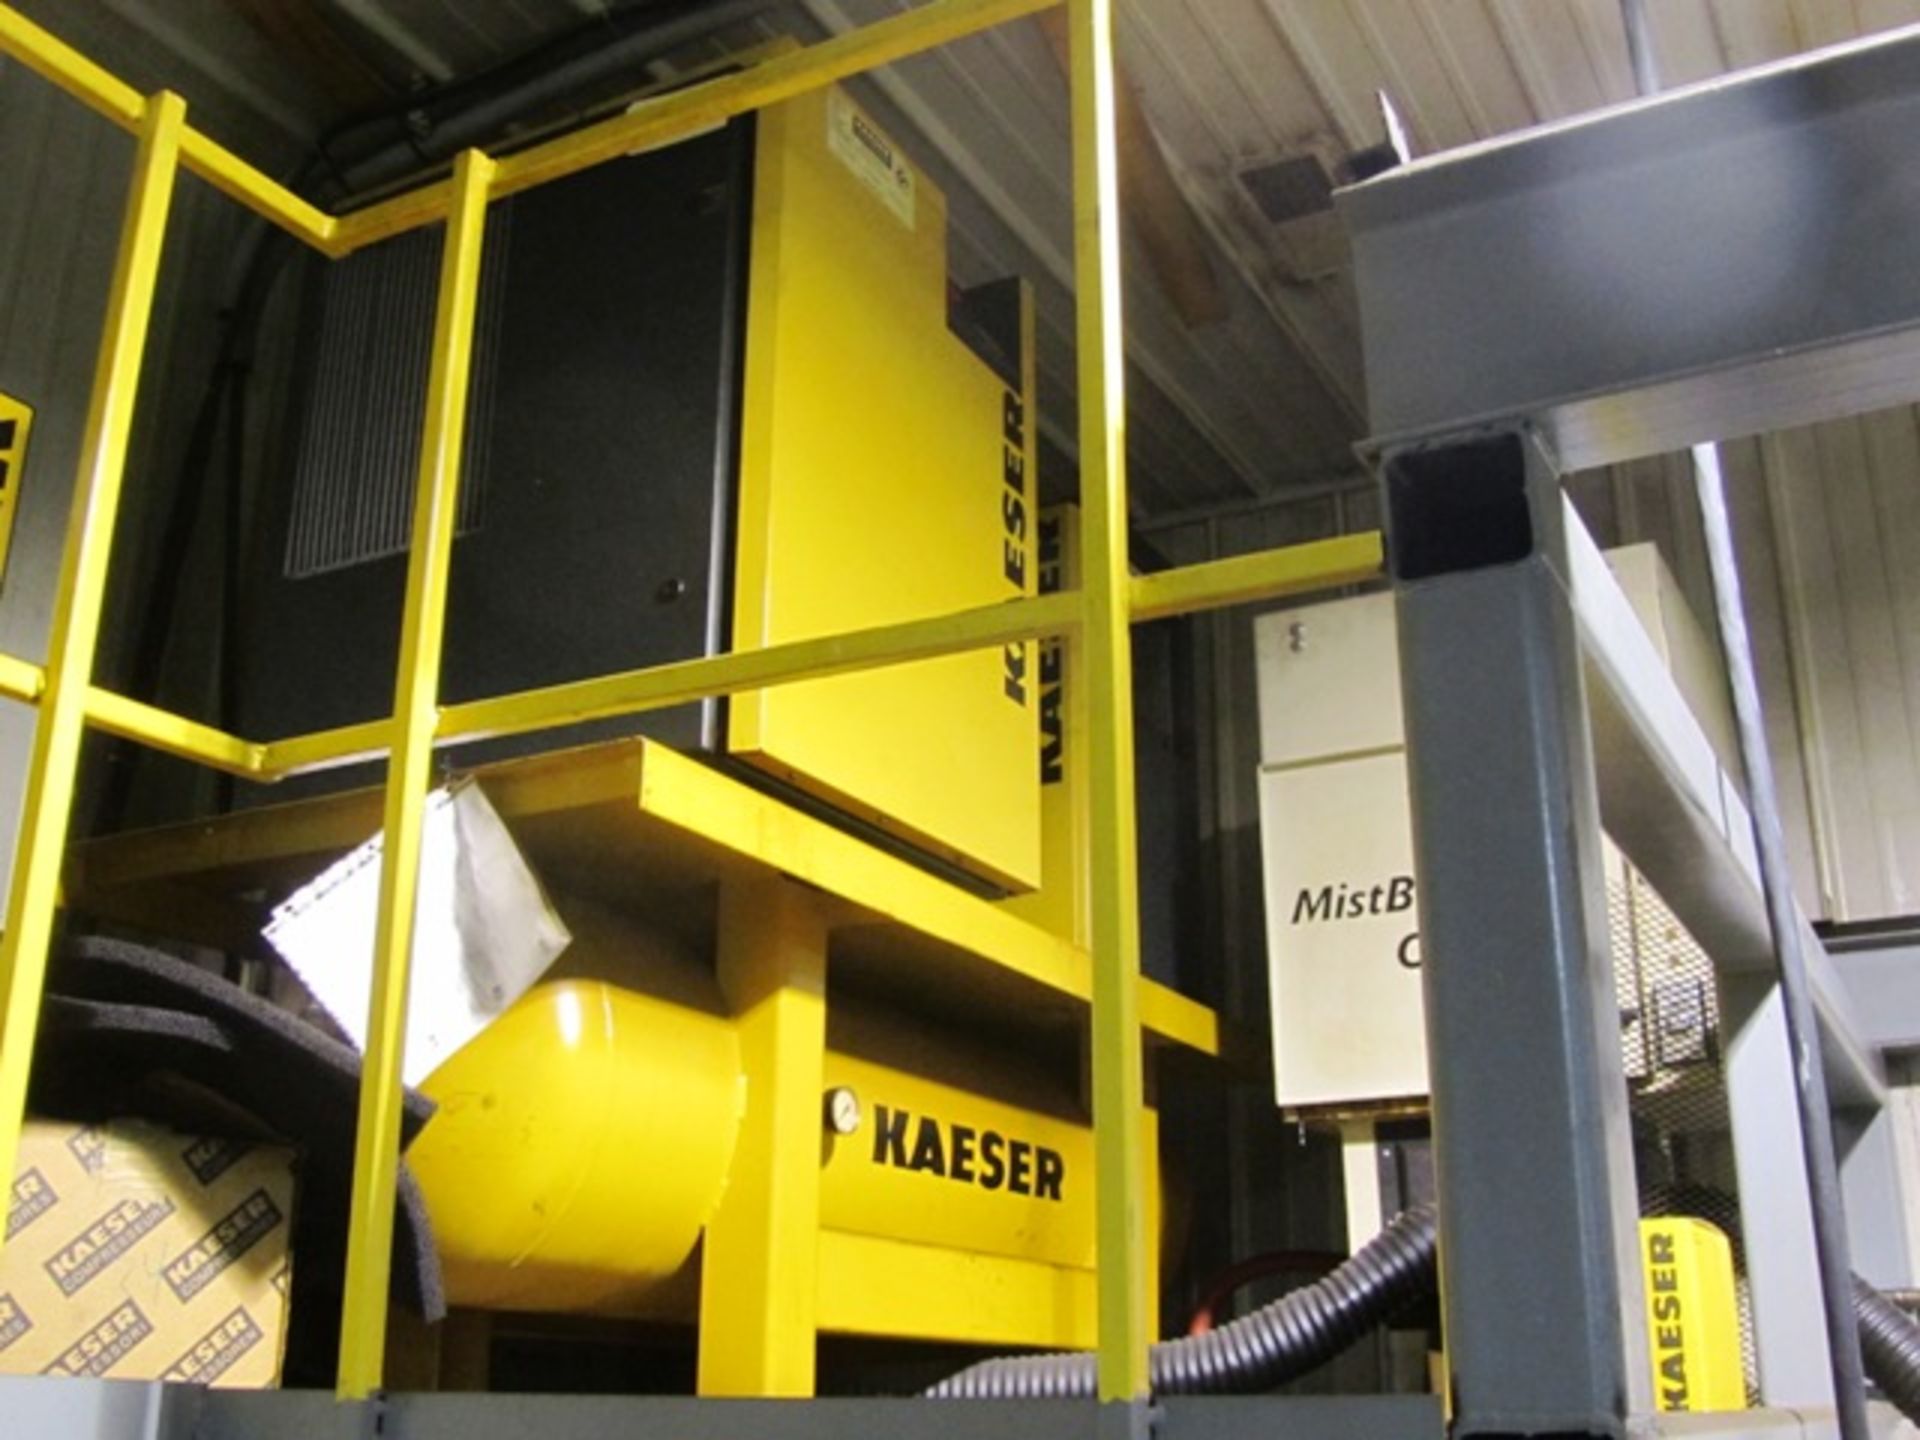 Kaeser Model SK19 15 HP Packaged Rotary Screw Air Compressor with TB19 Air Dryer, Air Holding